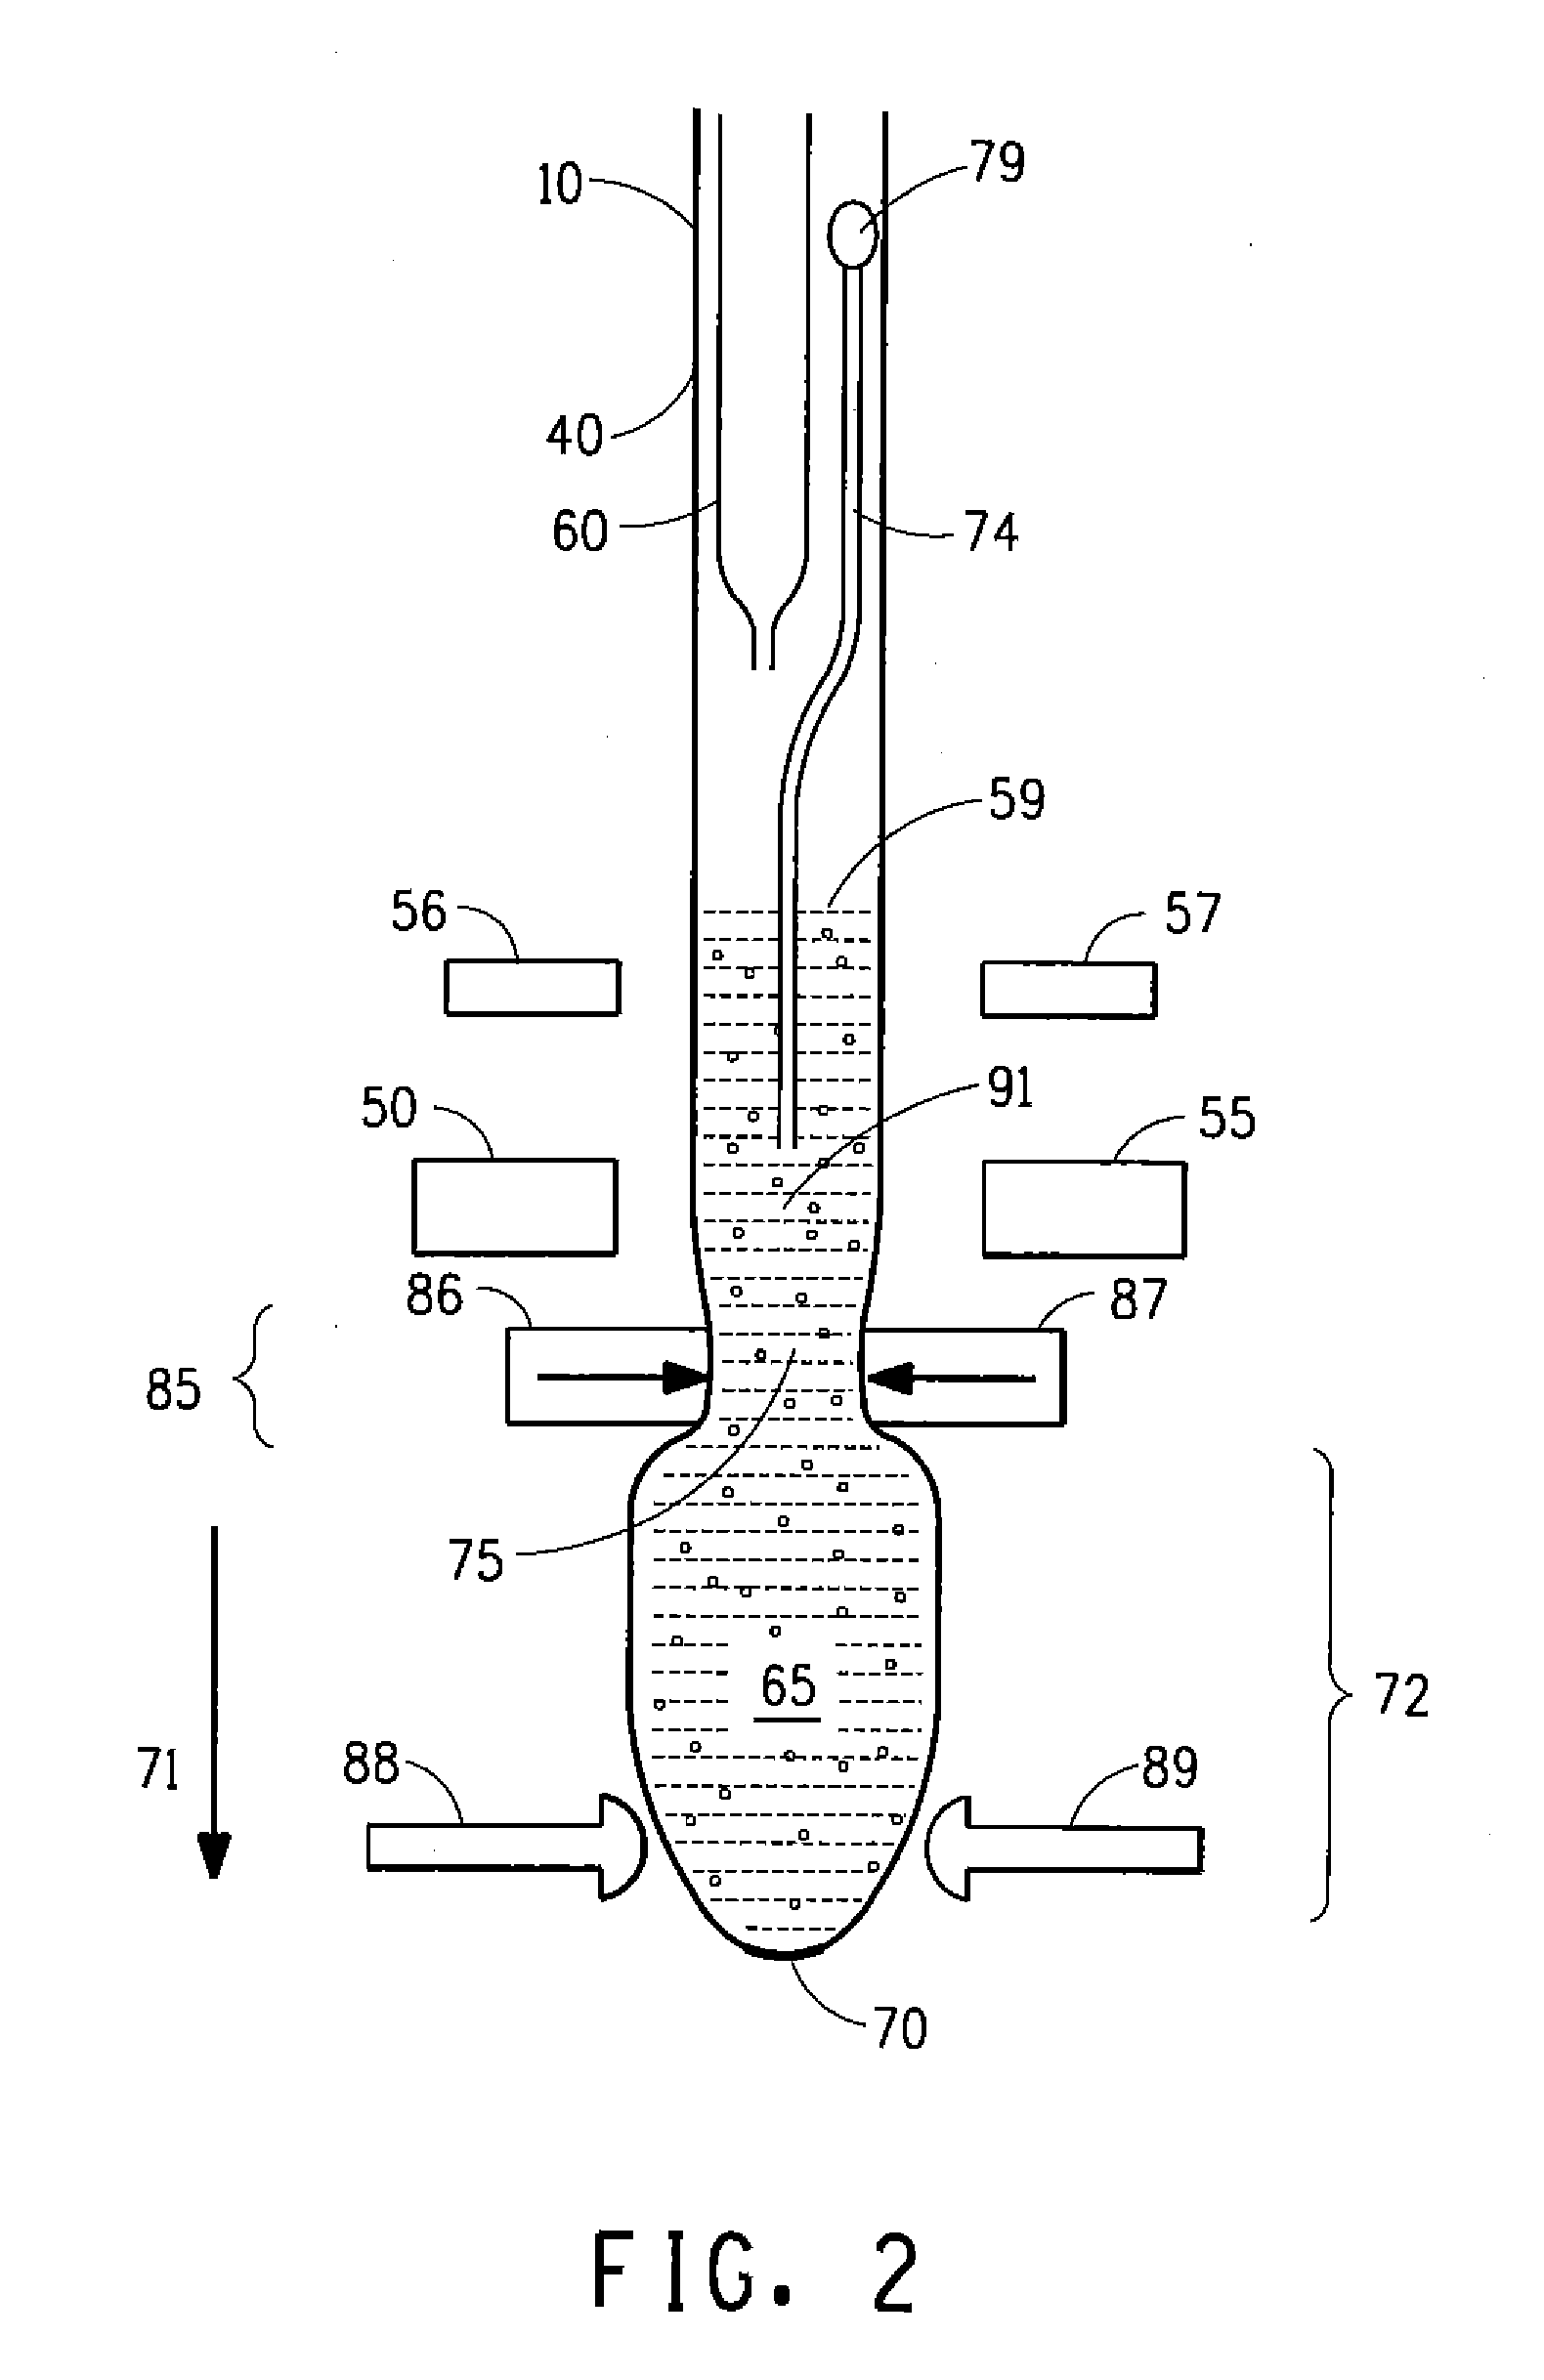 Process and apparatus for pouch-forming with optimized fill-accuracy and headspace